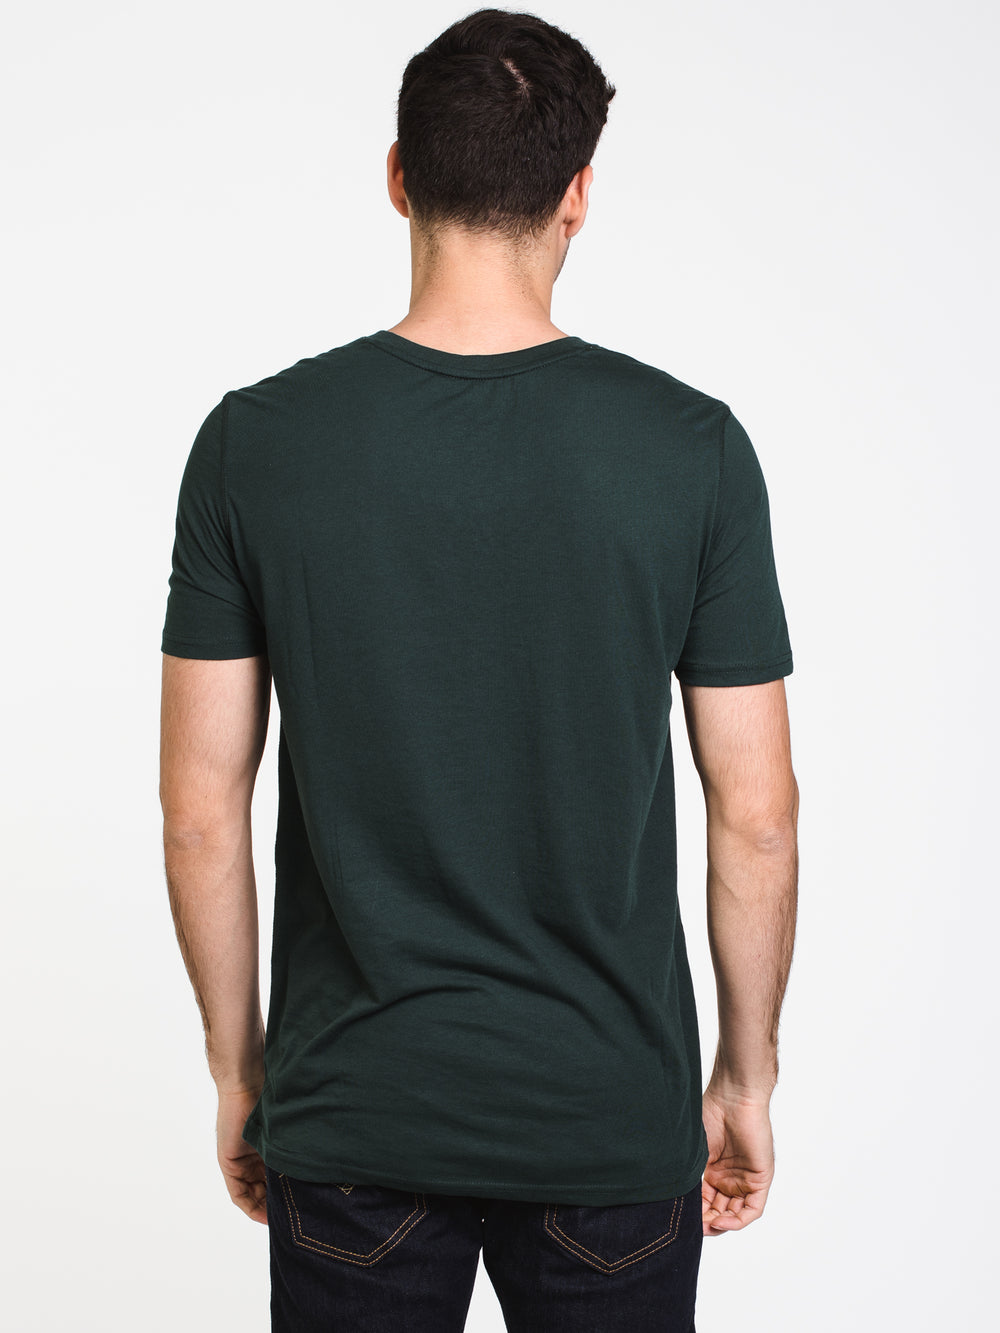 MENS VICTOR VNECK T - FOREST - CLEARANCE